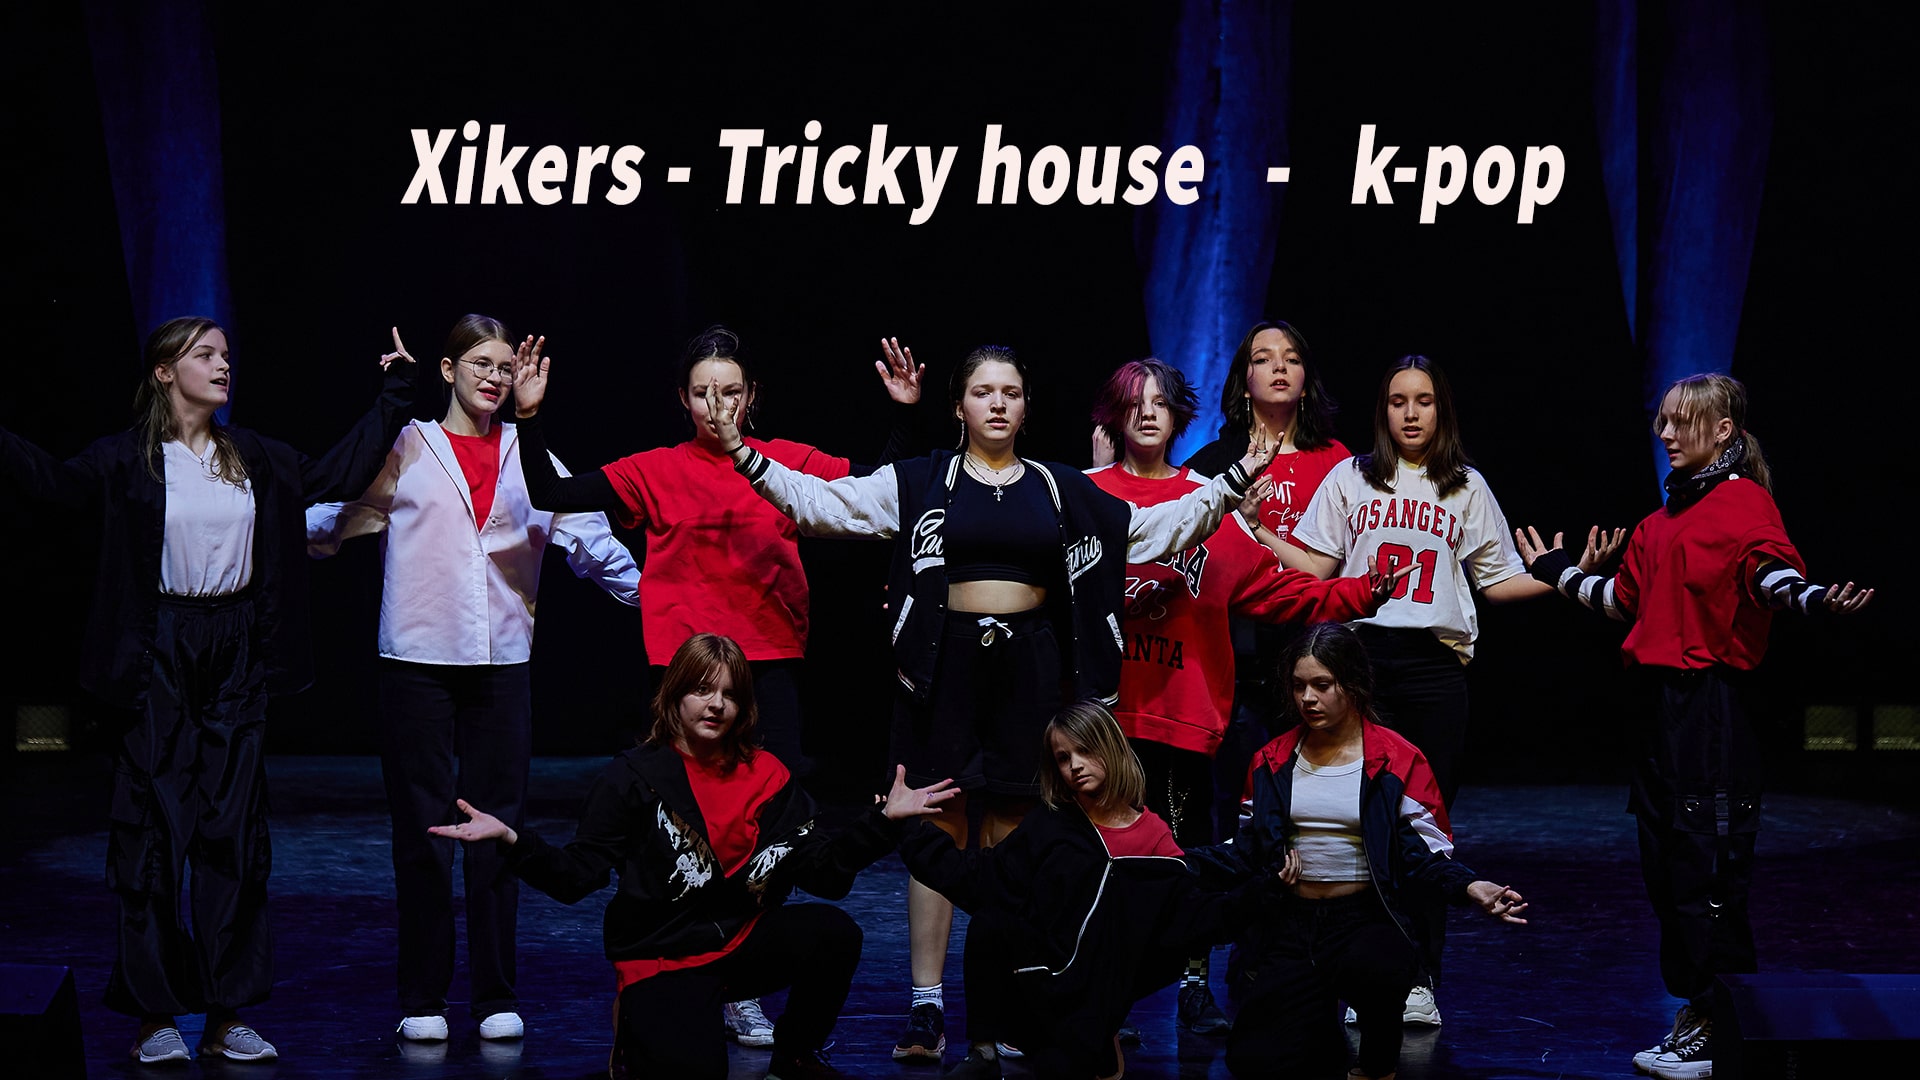 Xikers - Tricky house k-pop cover dance школа танца Divadance